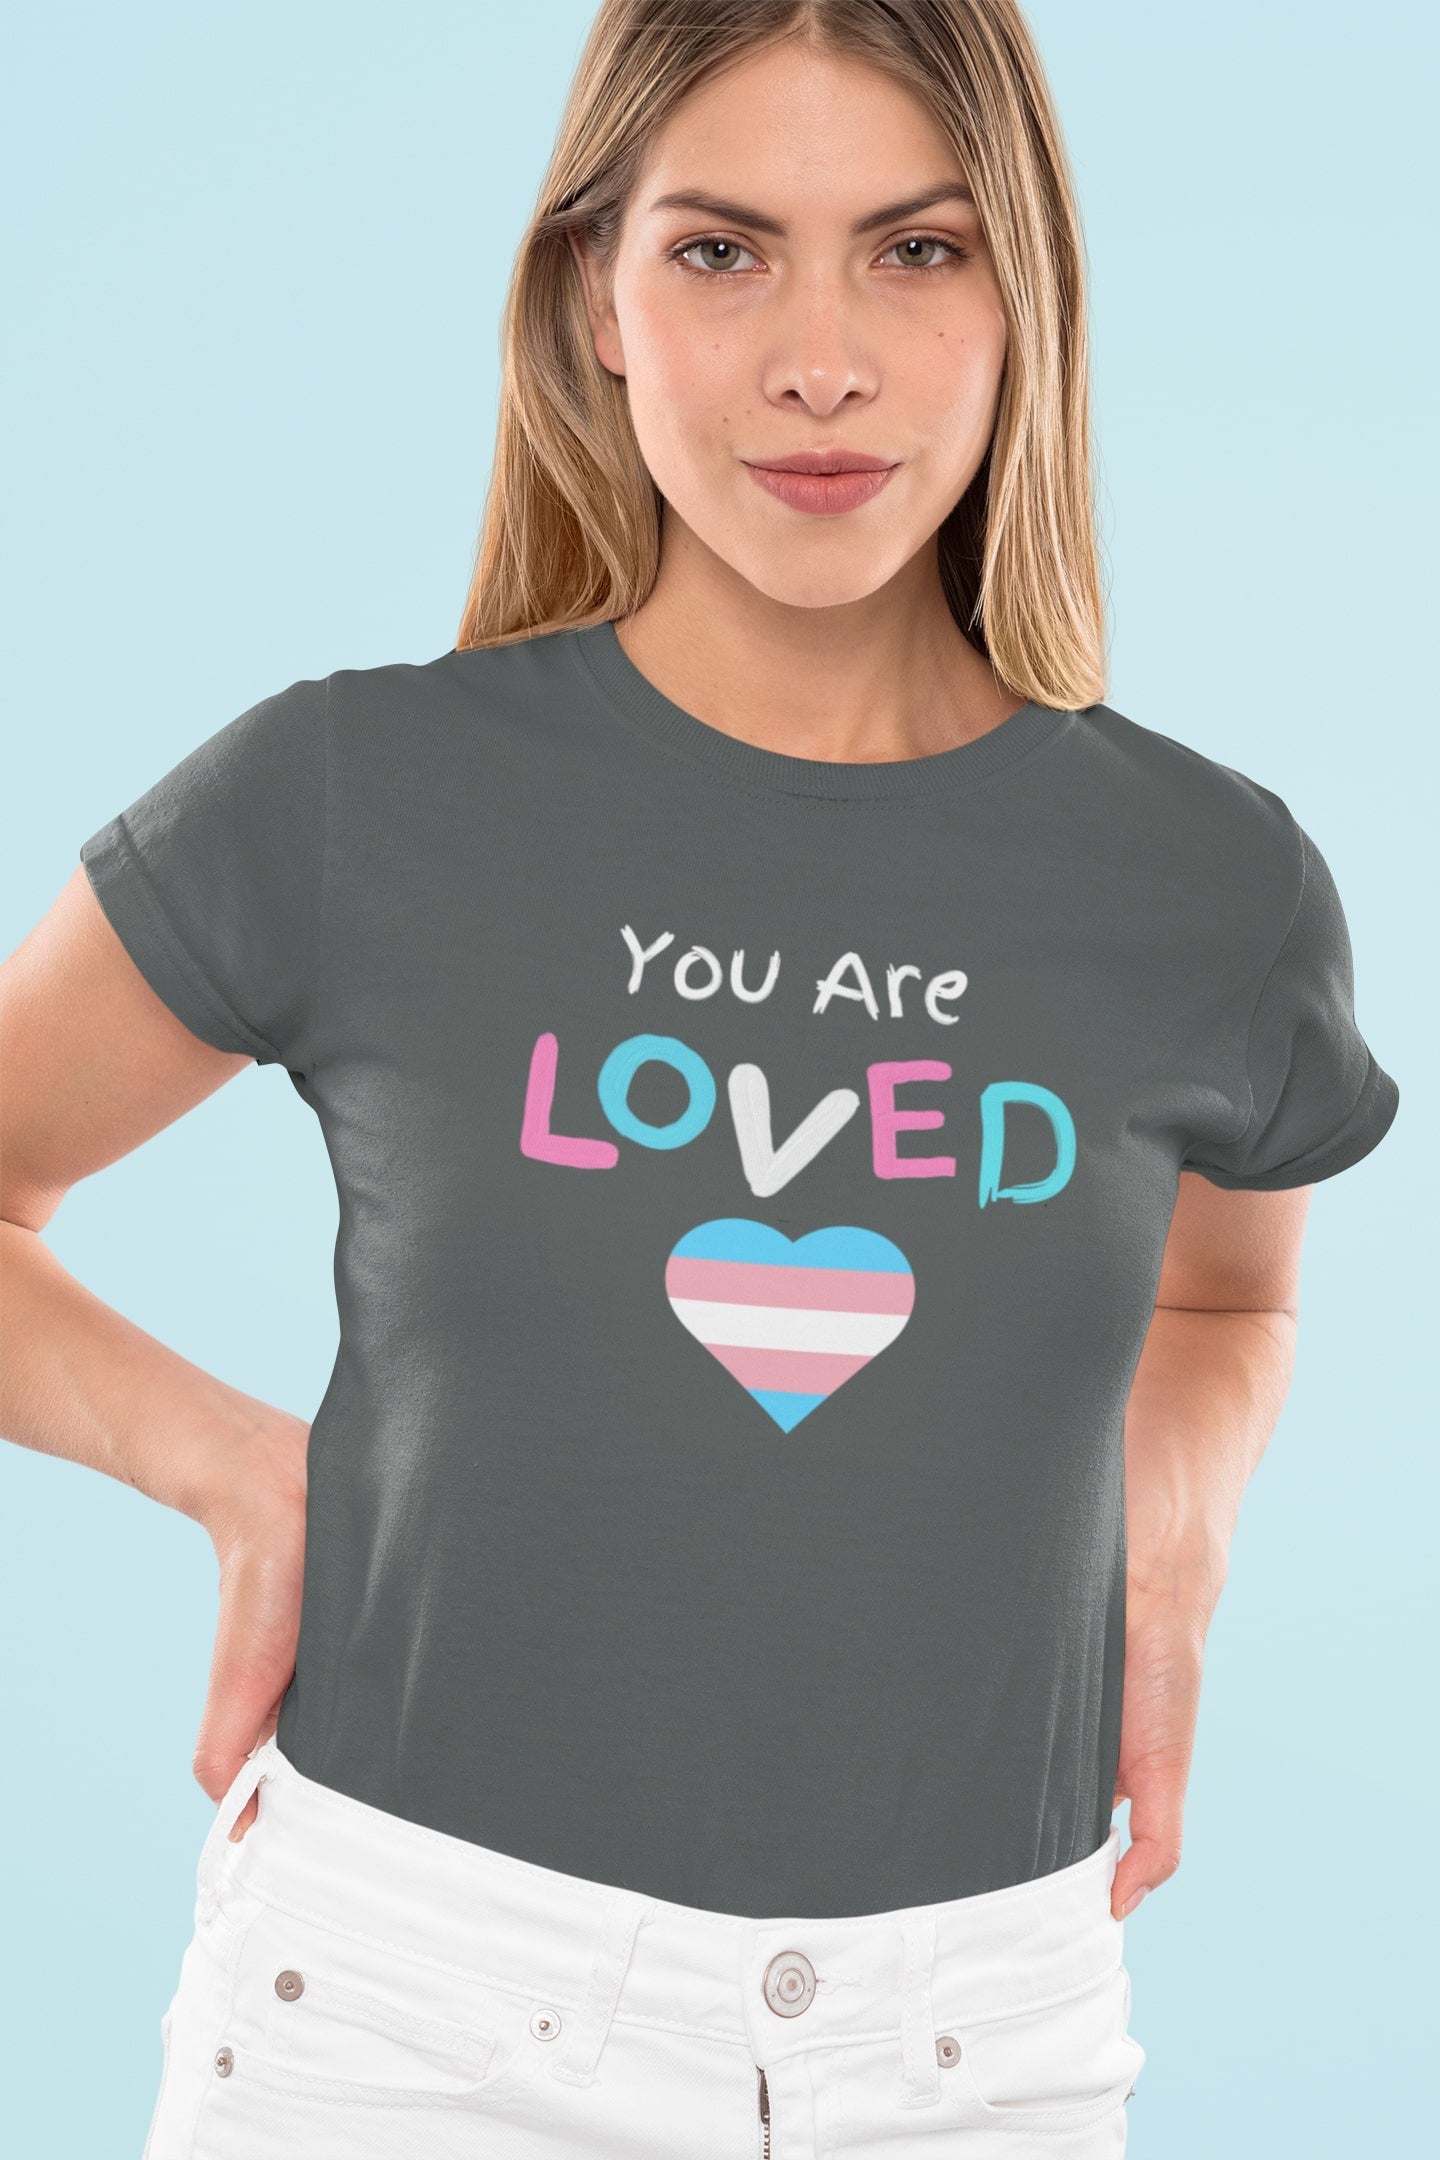 You Are Loved Protect Trans Kids Women's Softstyle T Shirt